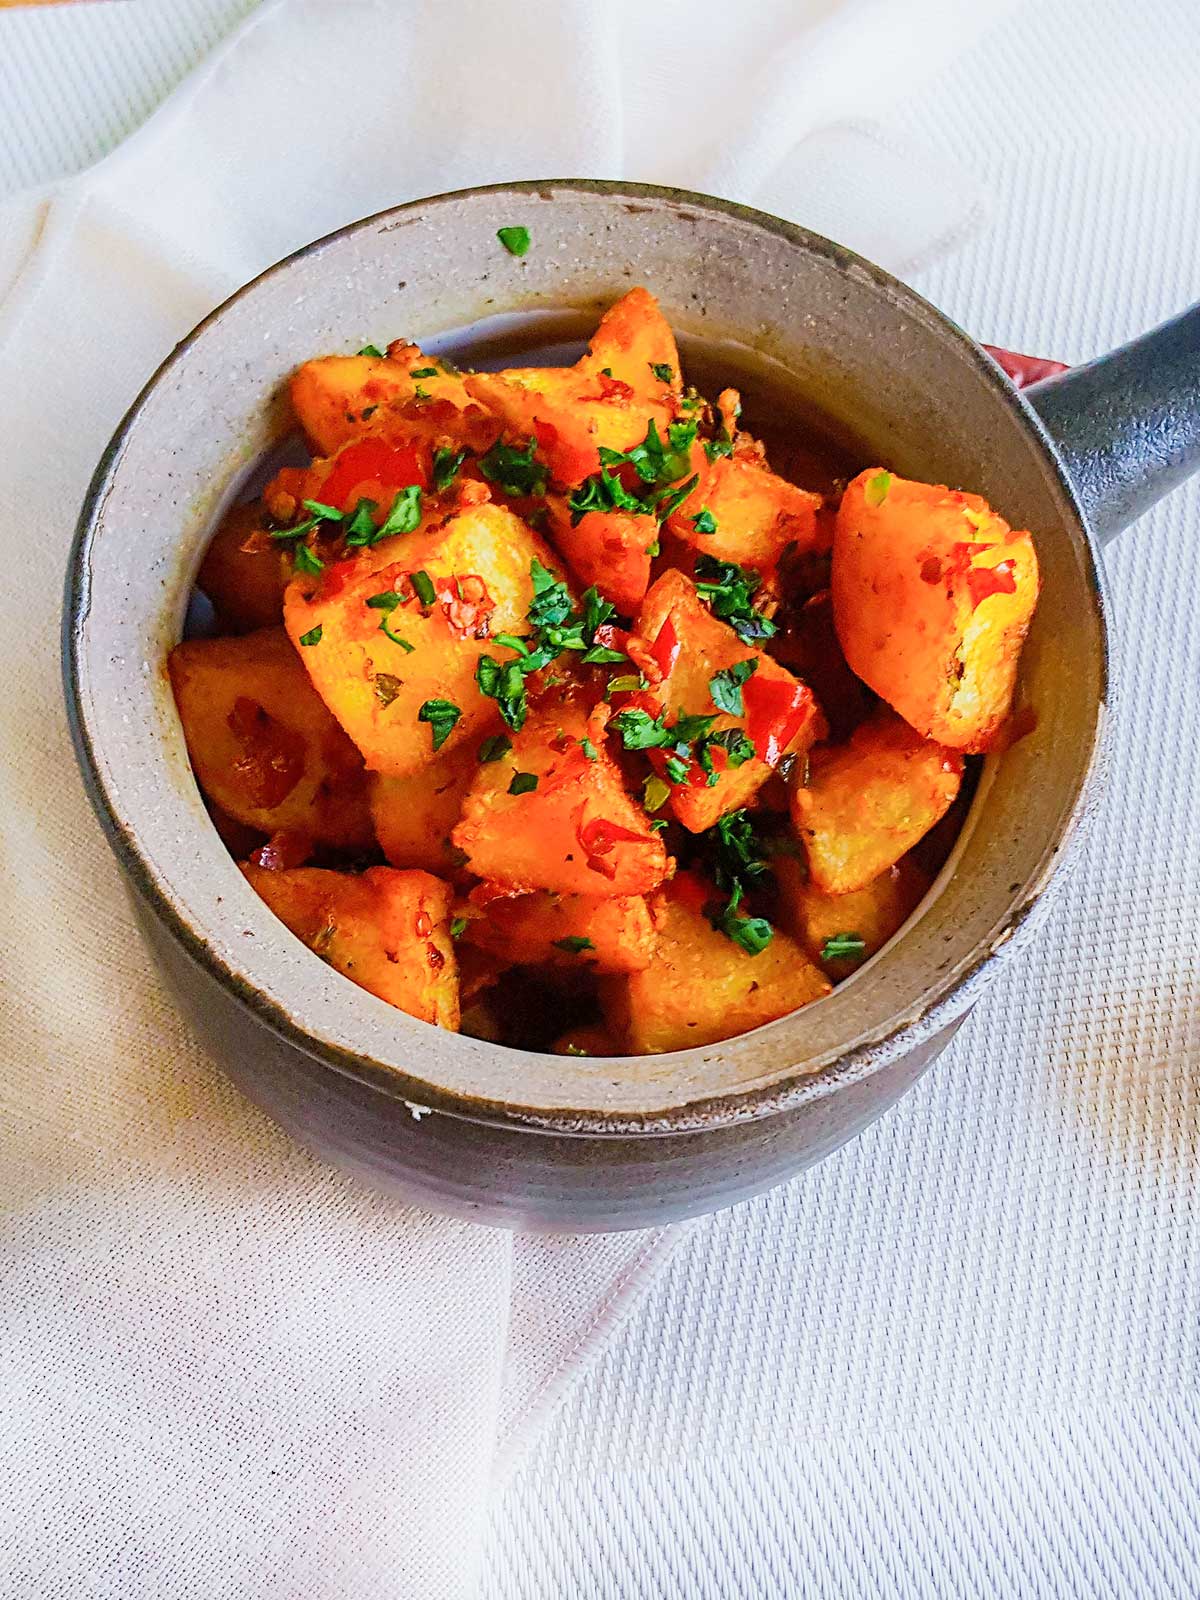 batata haara served in a deep round bowl with handle